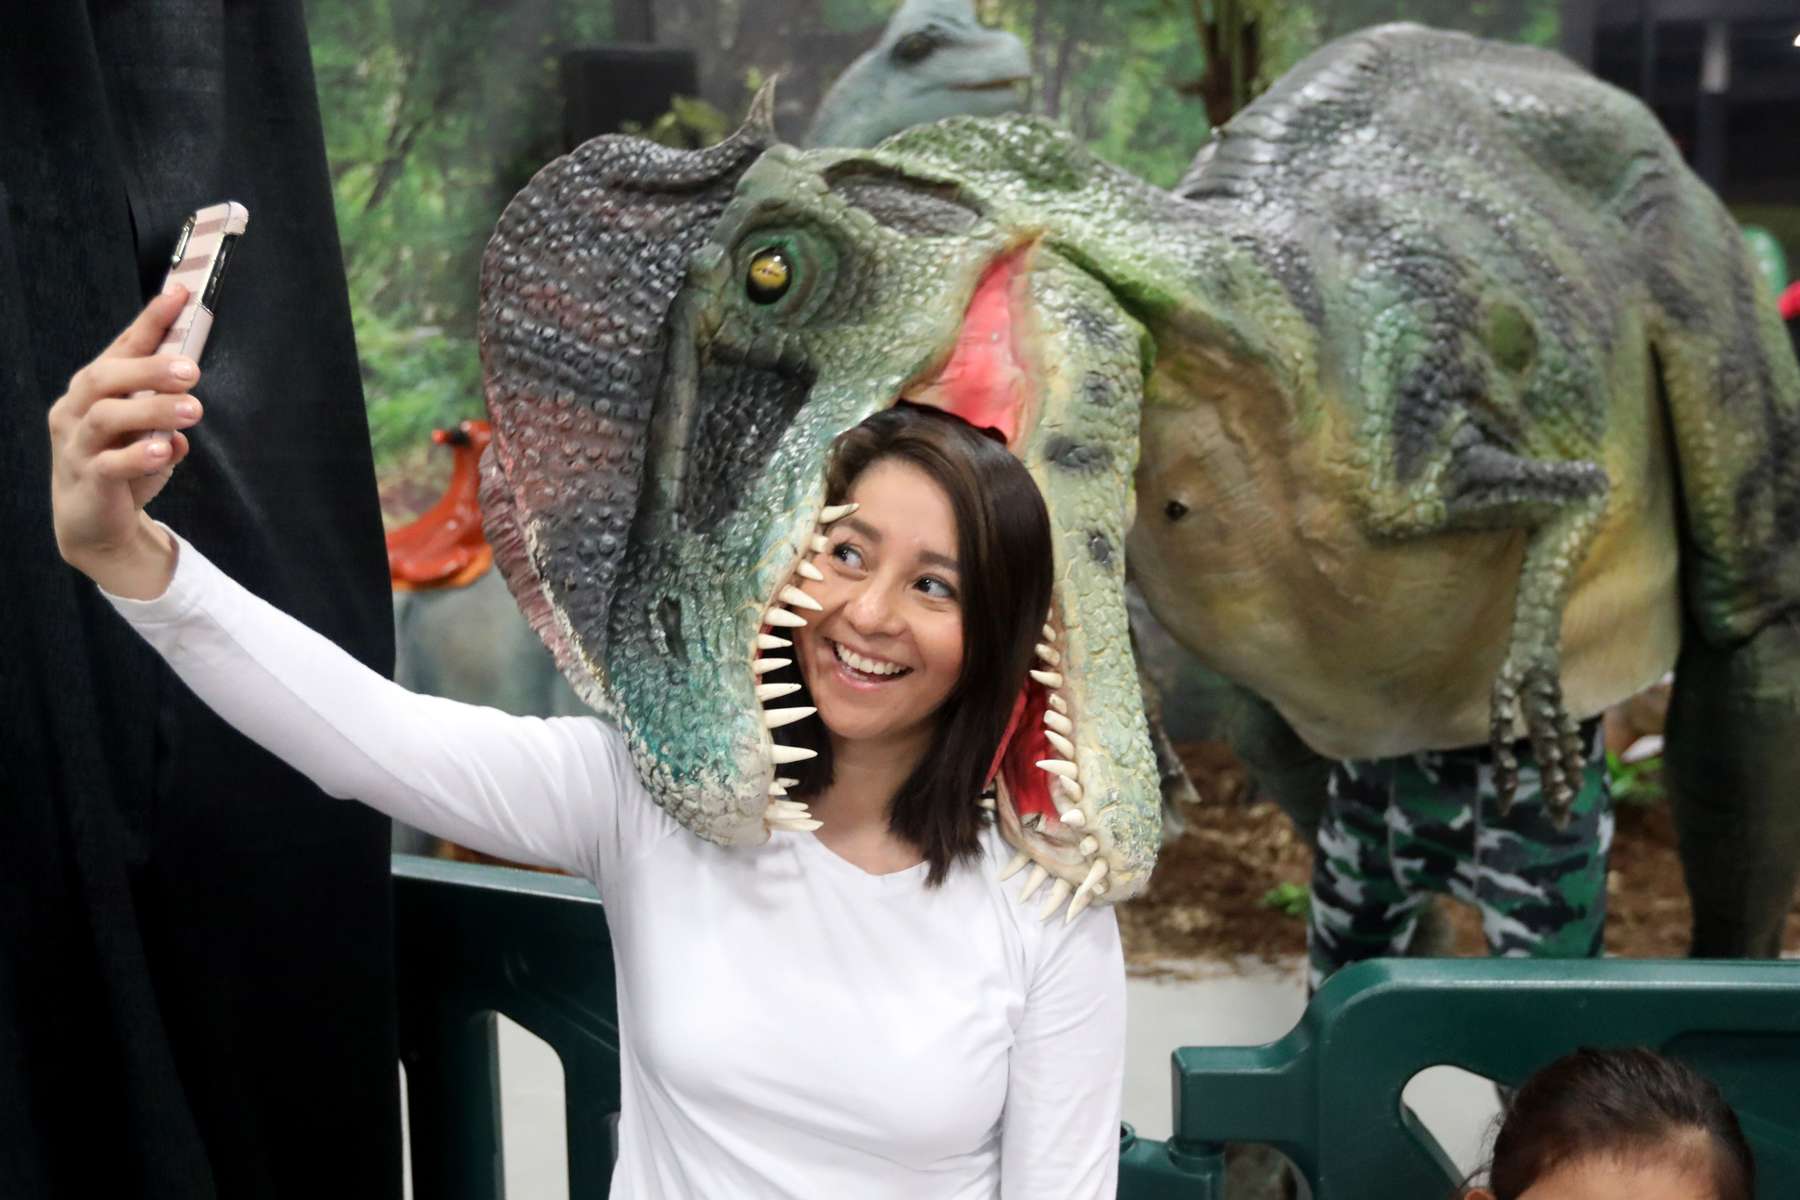 Elodia Villanueva take selfie with the Dilophosaurus dinosaur at Jurassic Quest, a dinosaur event, at the New Jersey Convention and Exposition Center in Edison.